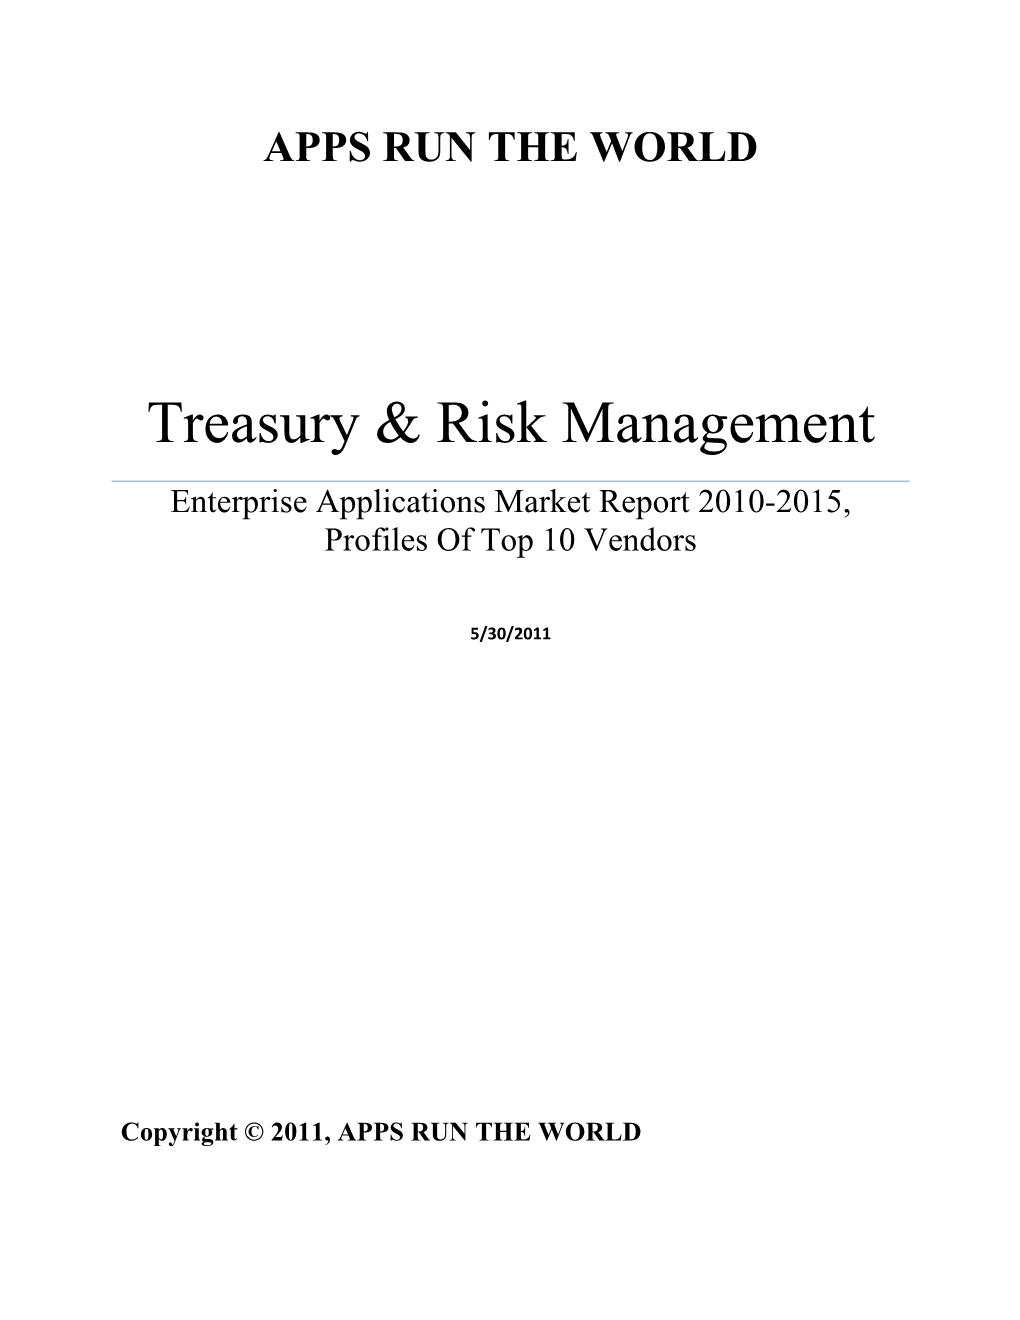 Treasury and Risk Management Applications Market 2010-2015